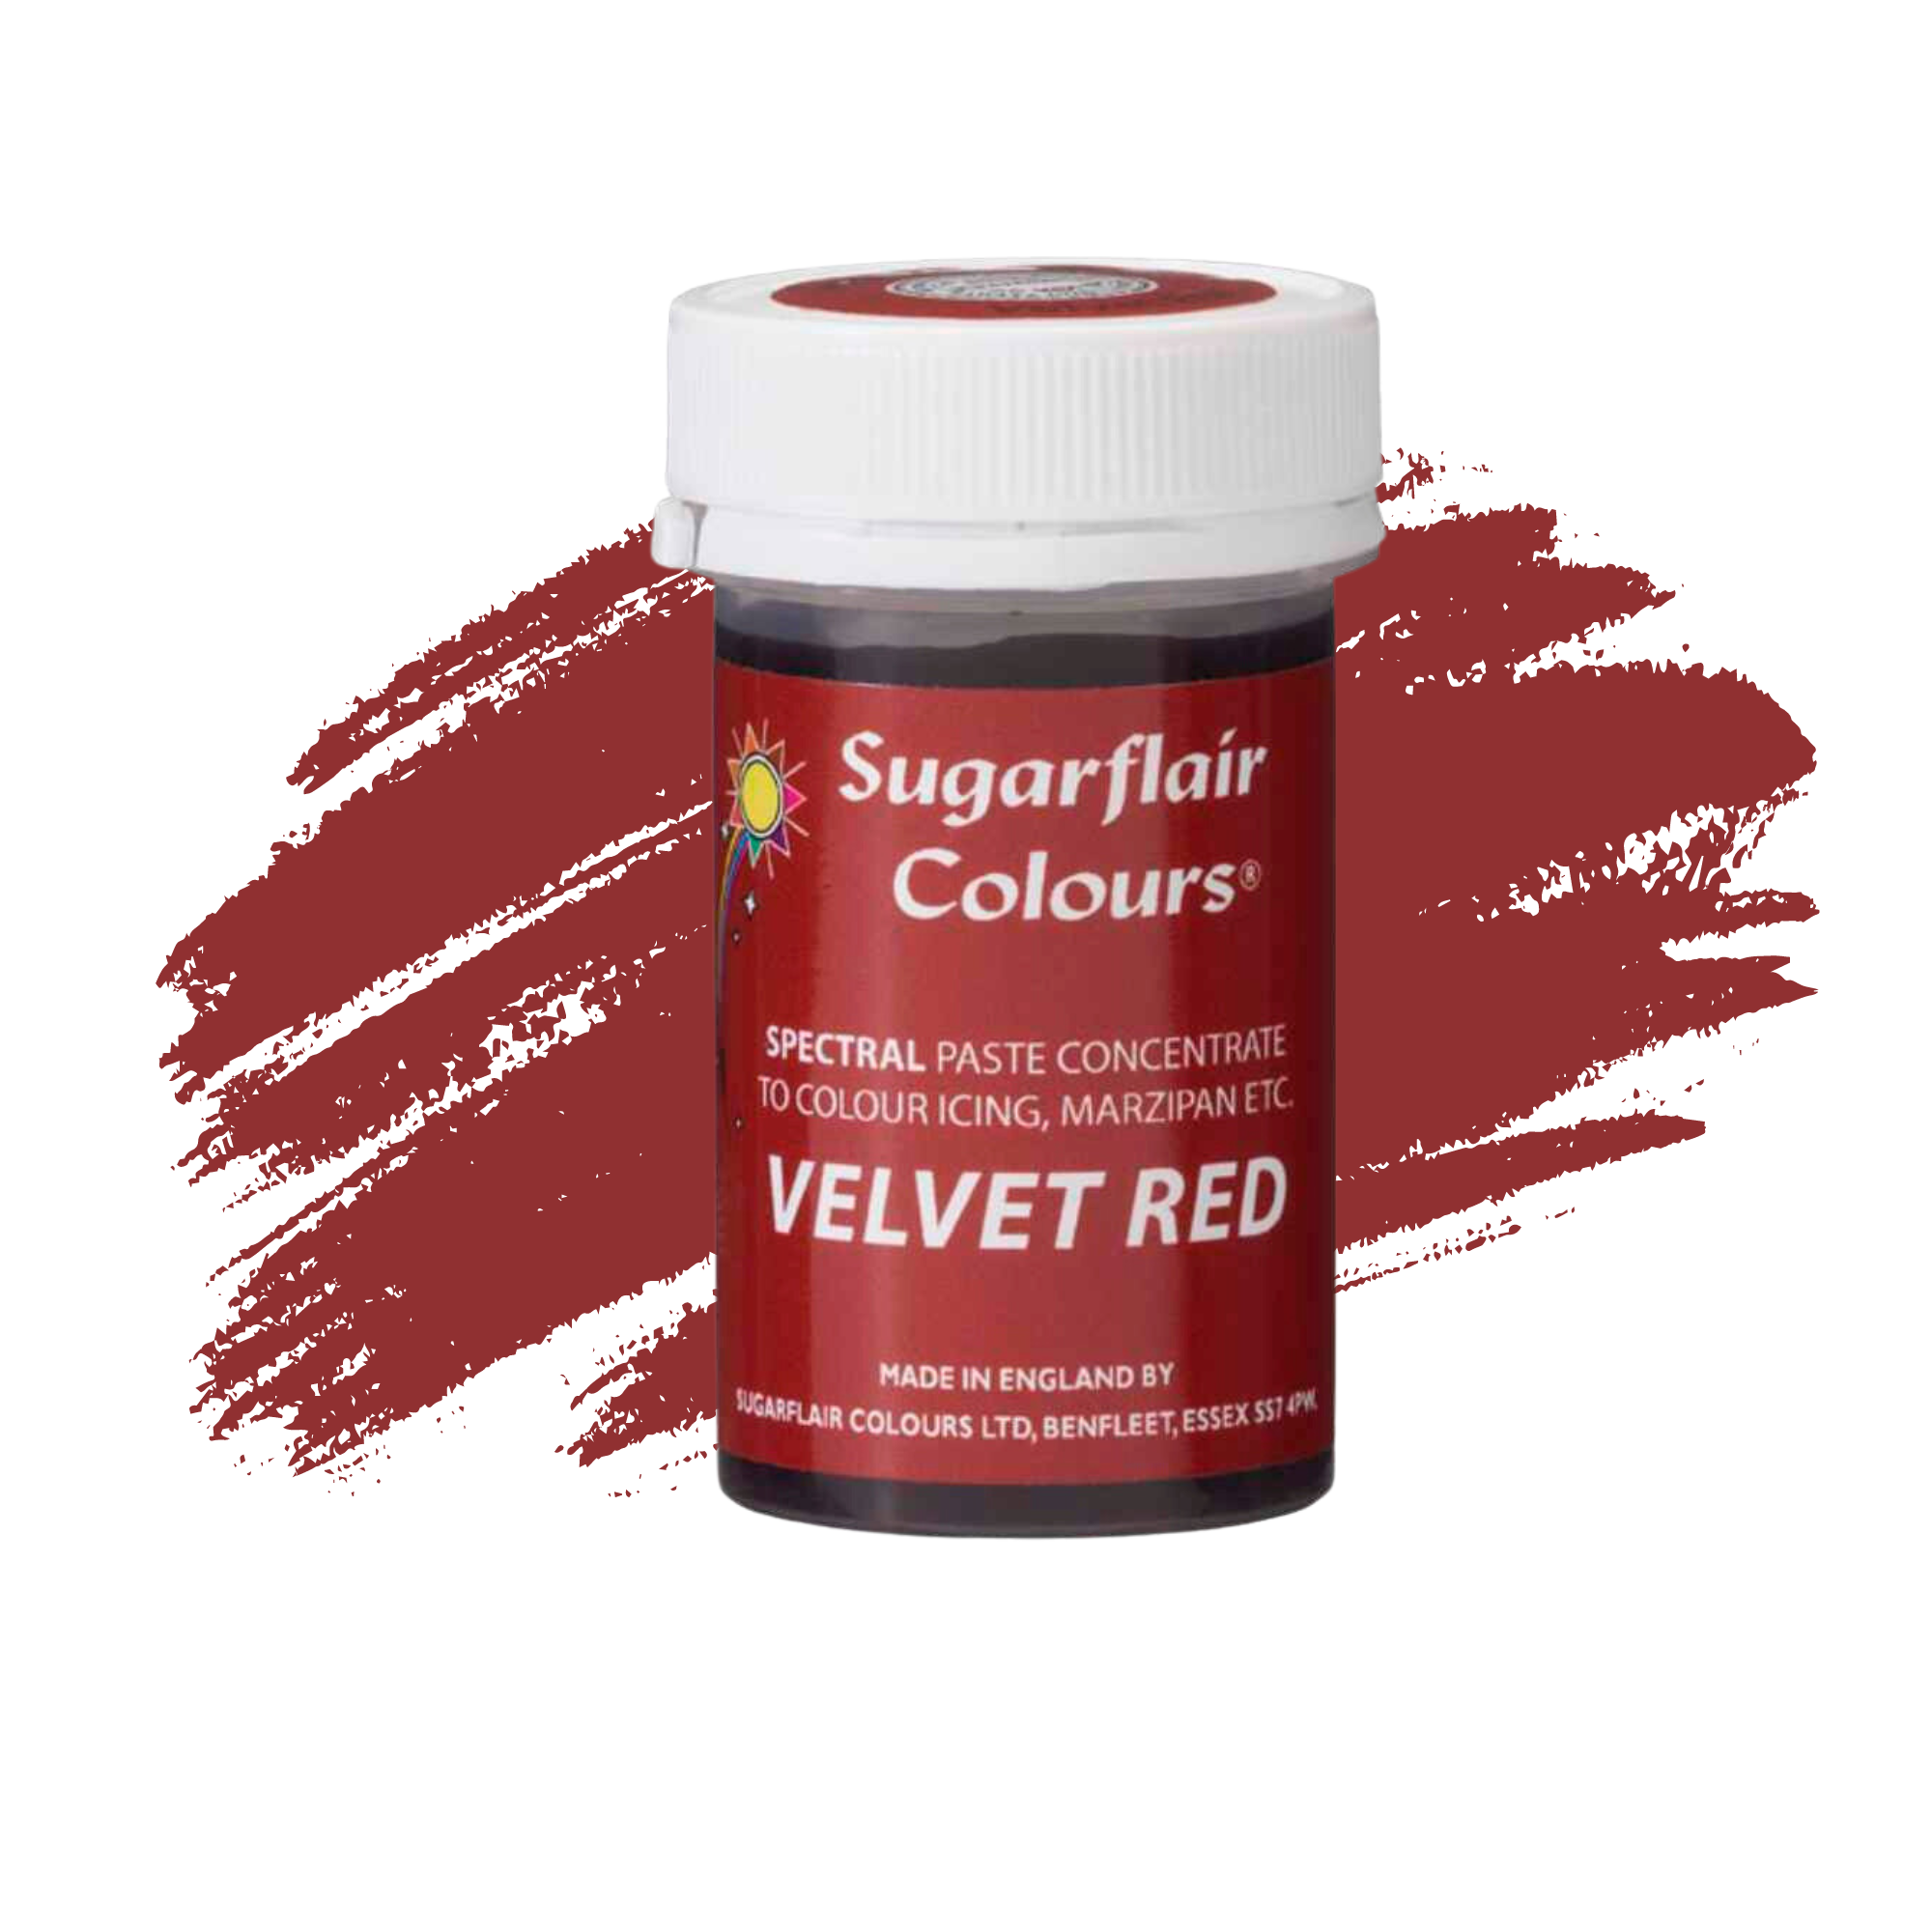 Sugarflair Paste Colours Concentrated Food Colouring - Spectral Velvet Red - 25g